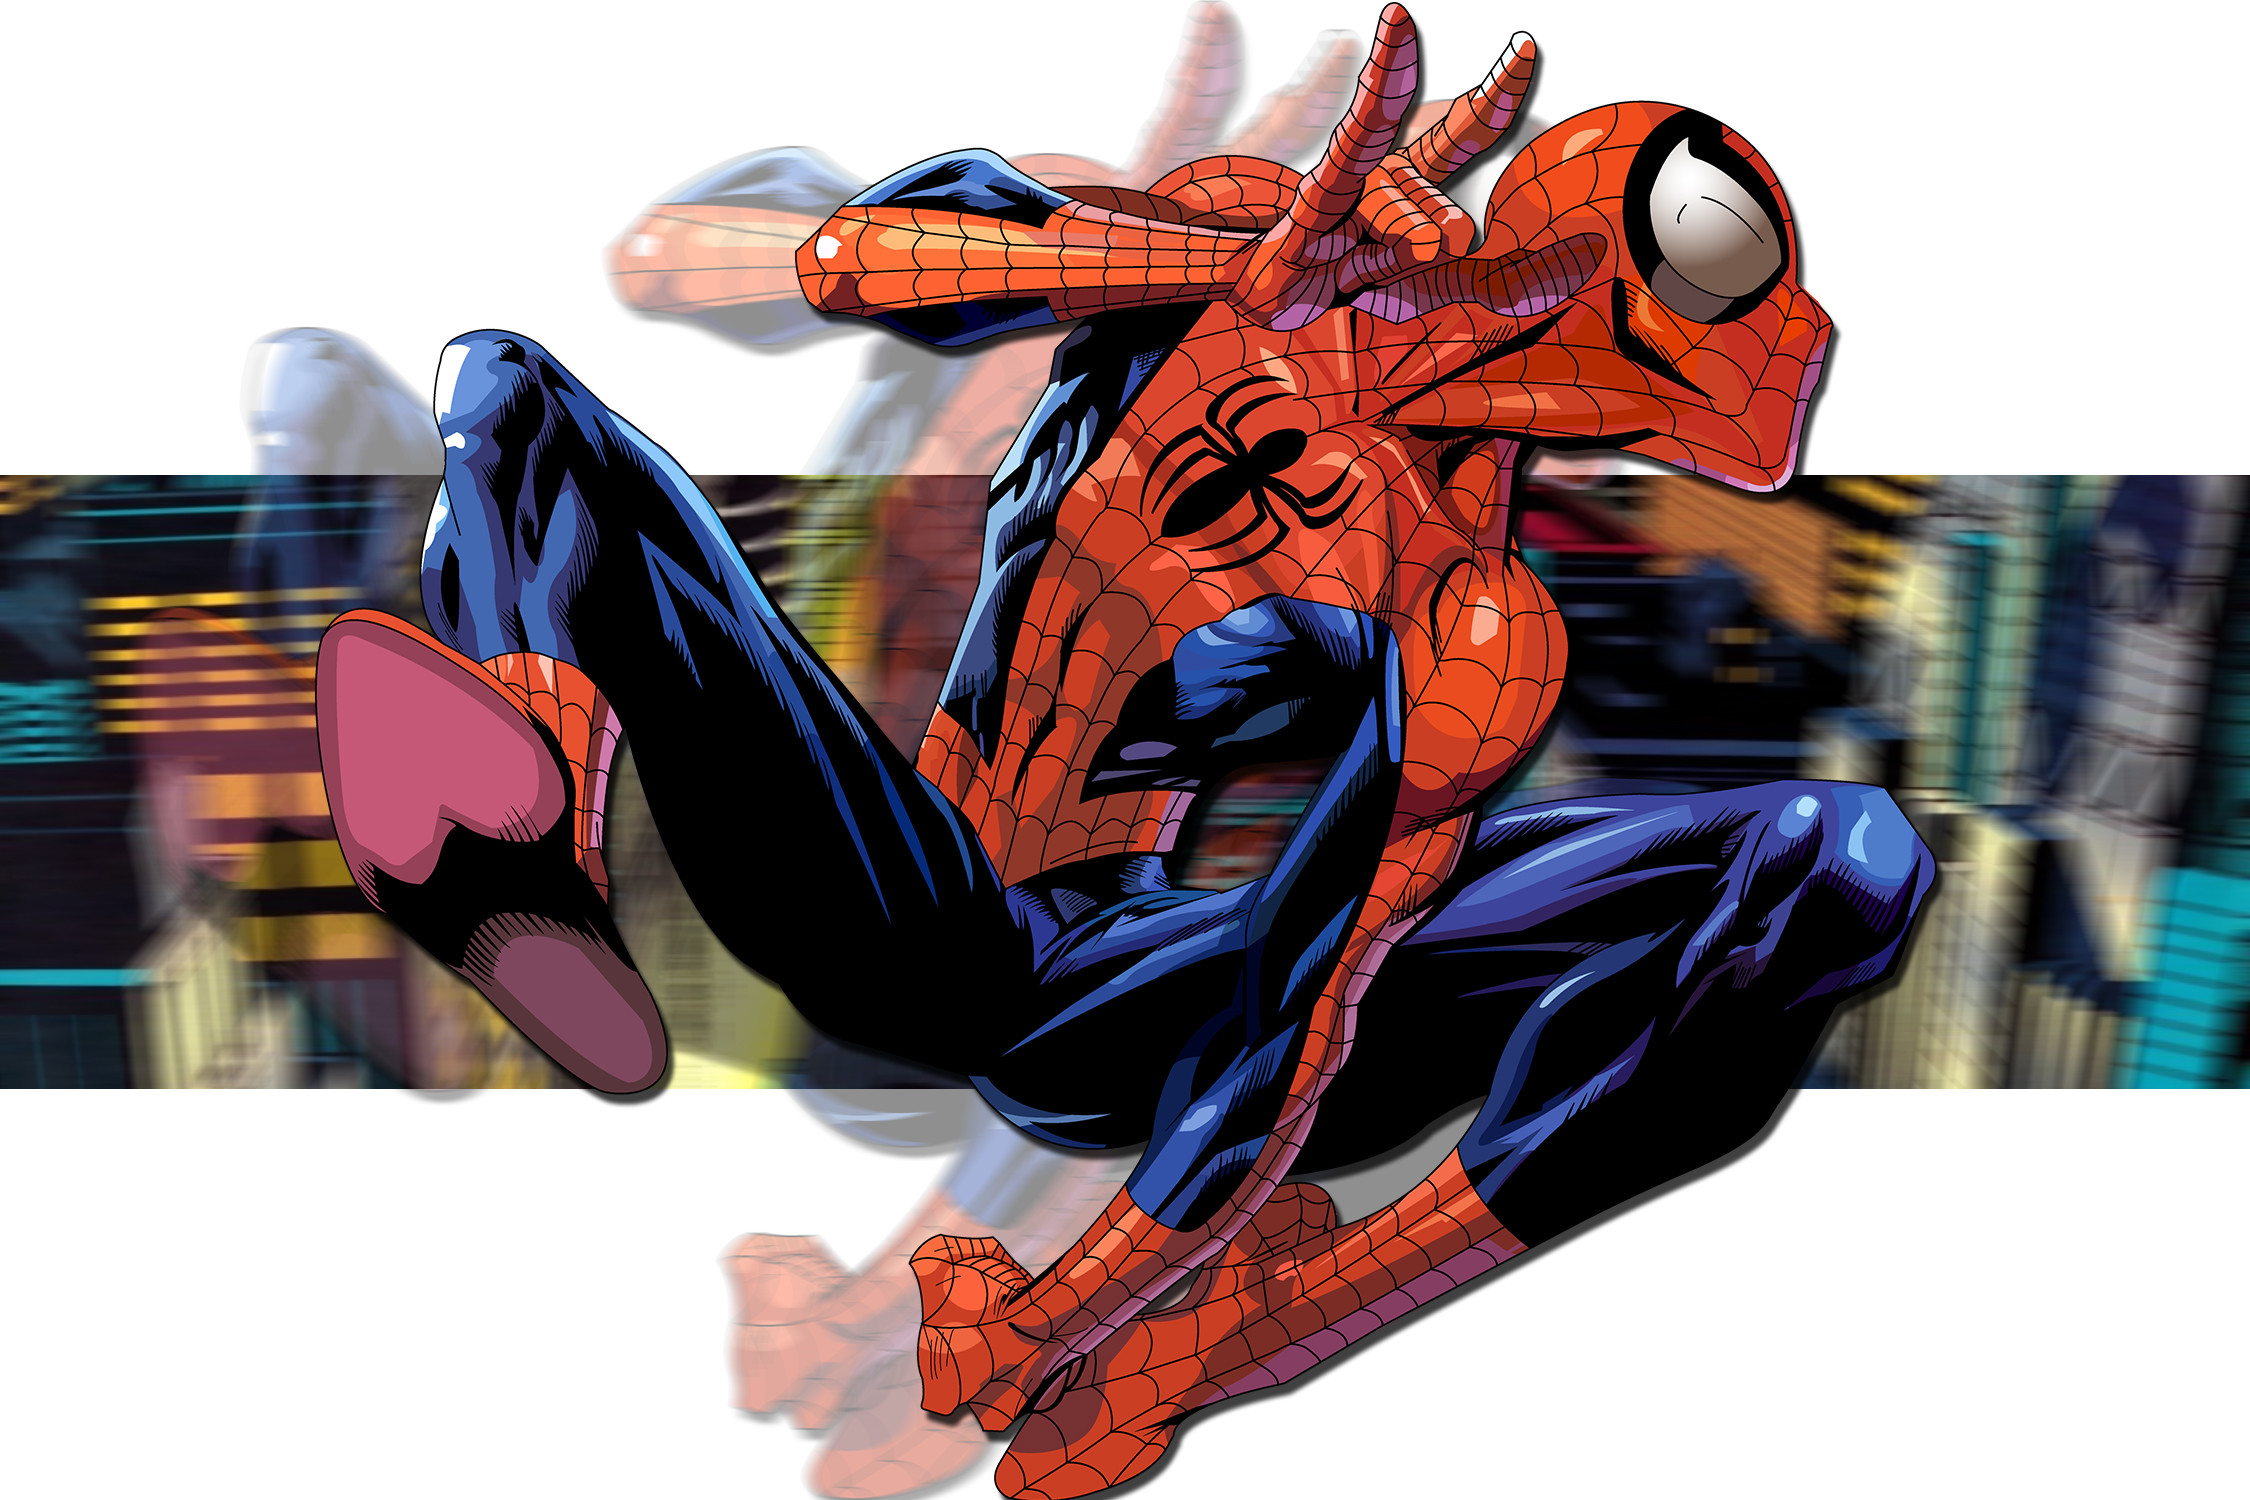 2250x1500 Ultimate spider man iphone wallpaper - photo#11